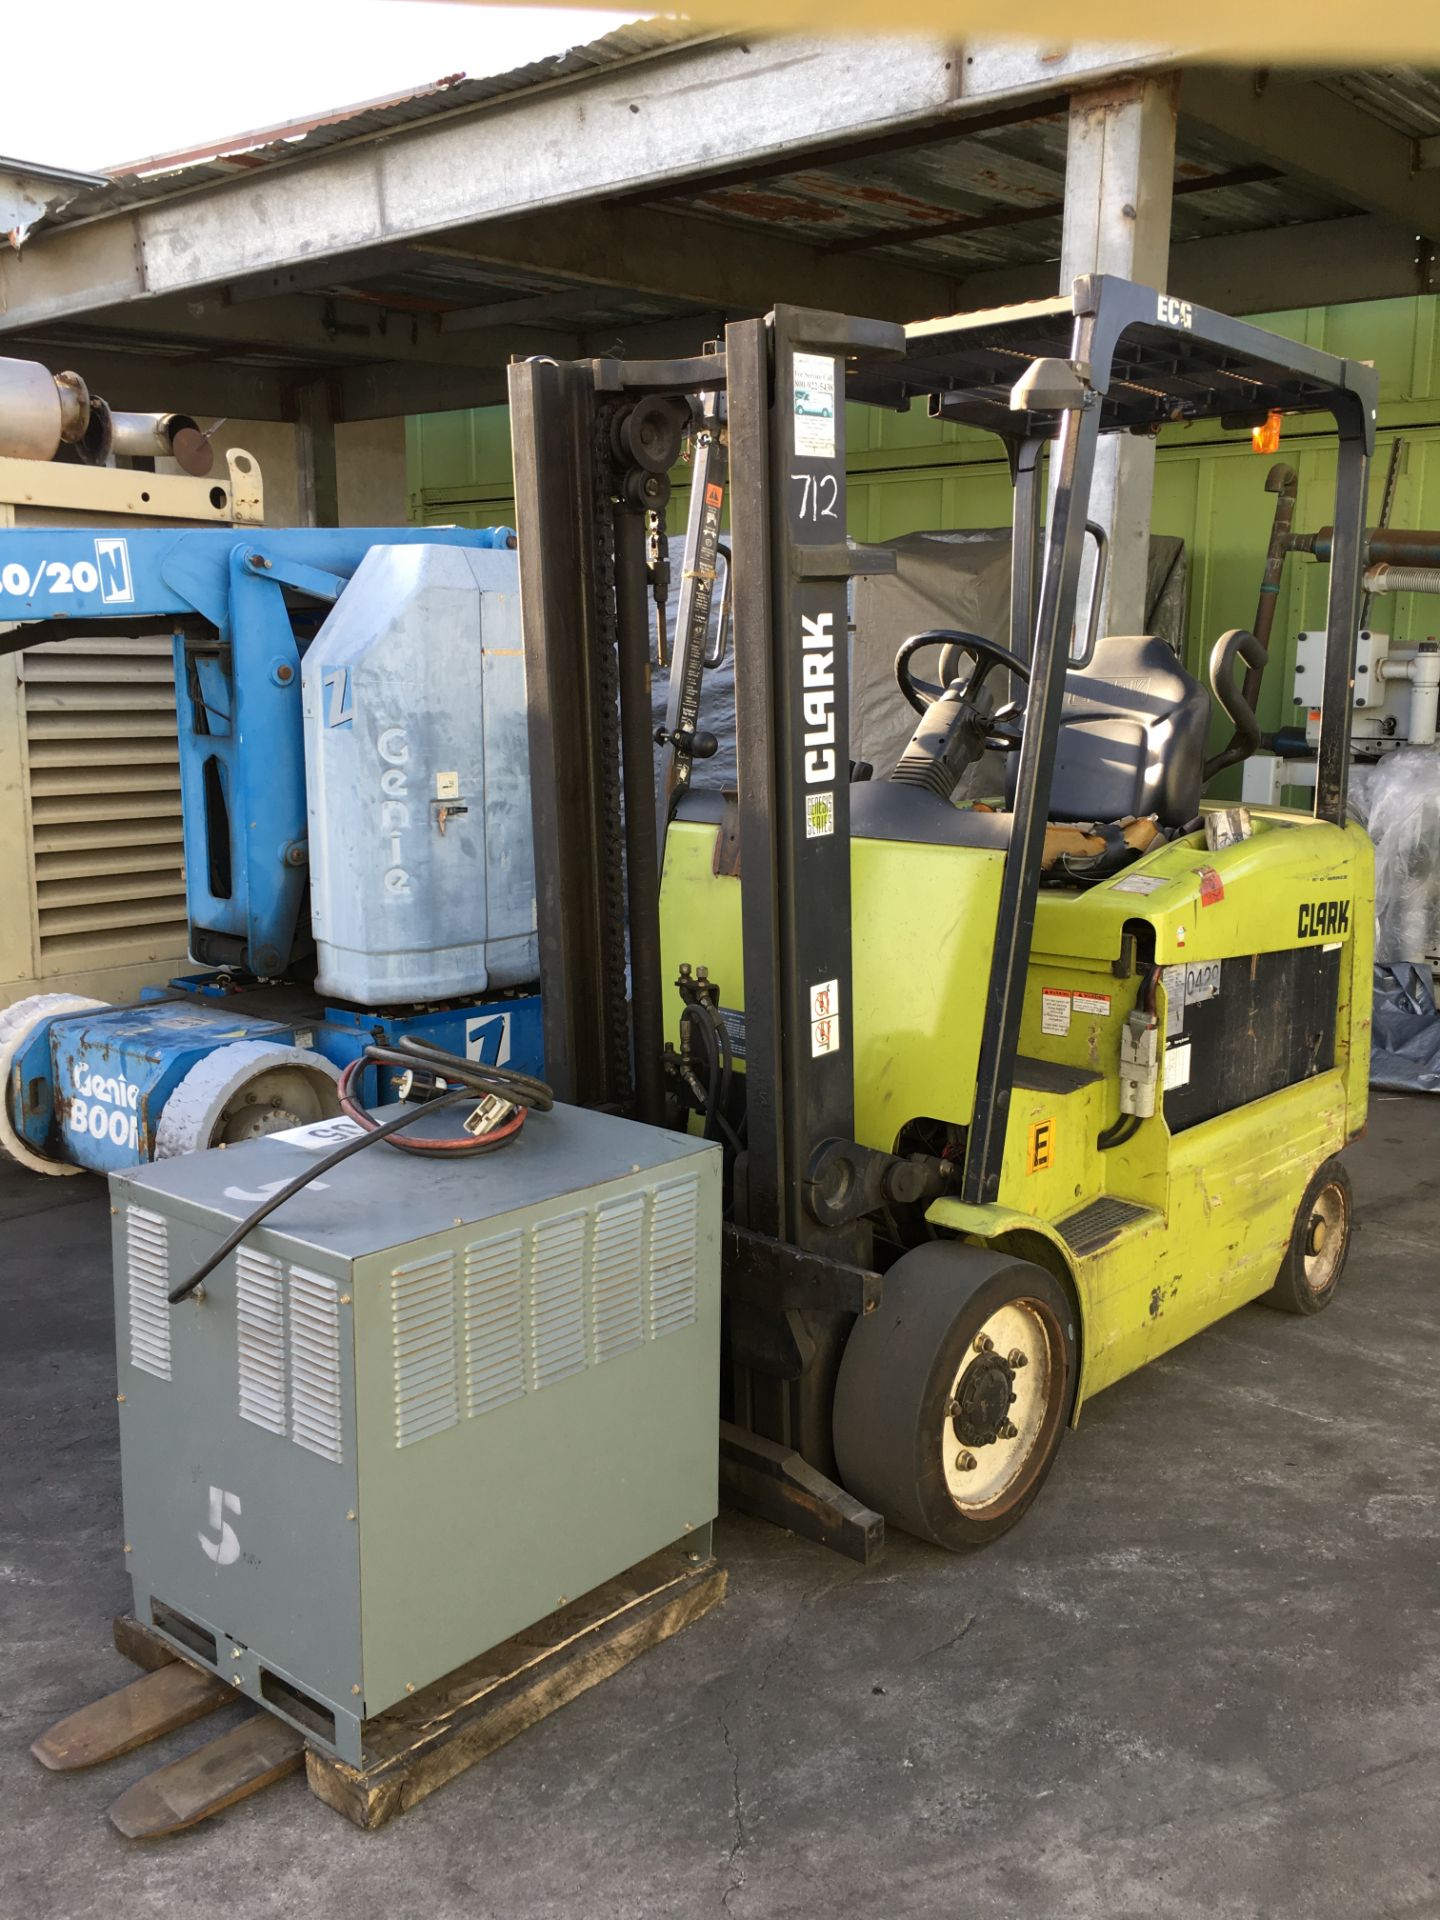 CLARK 4500 LB CAPACITY ELECTRIC FORKLIFT WITH BATTERY CHARGER Loading Fee: 100